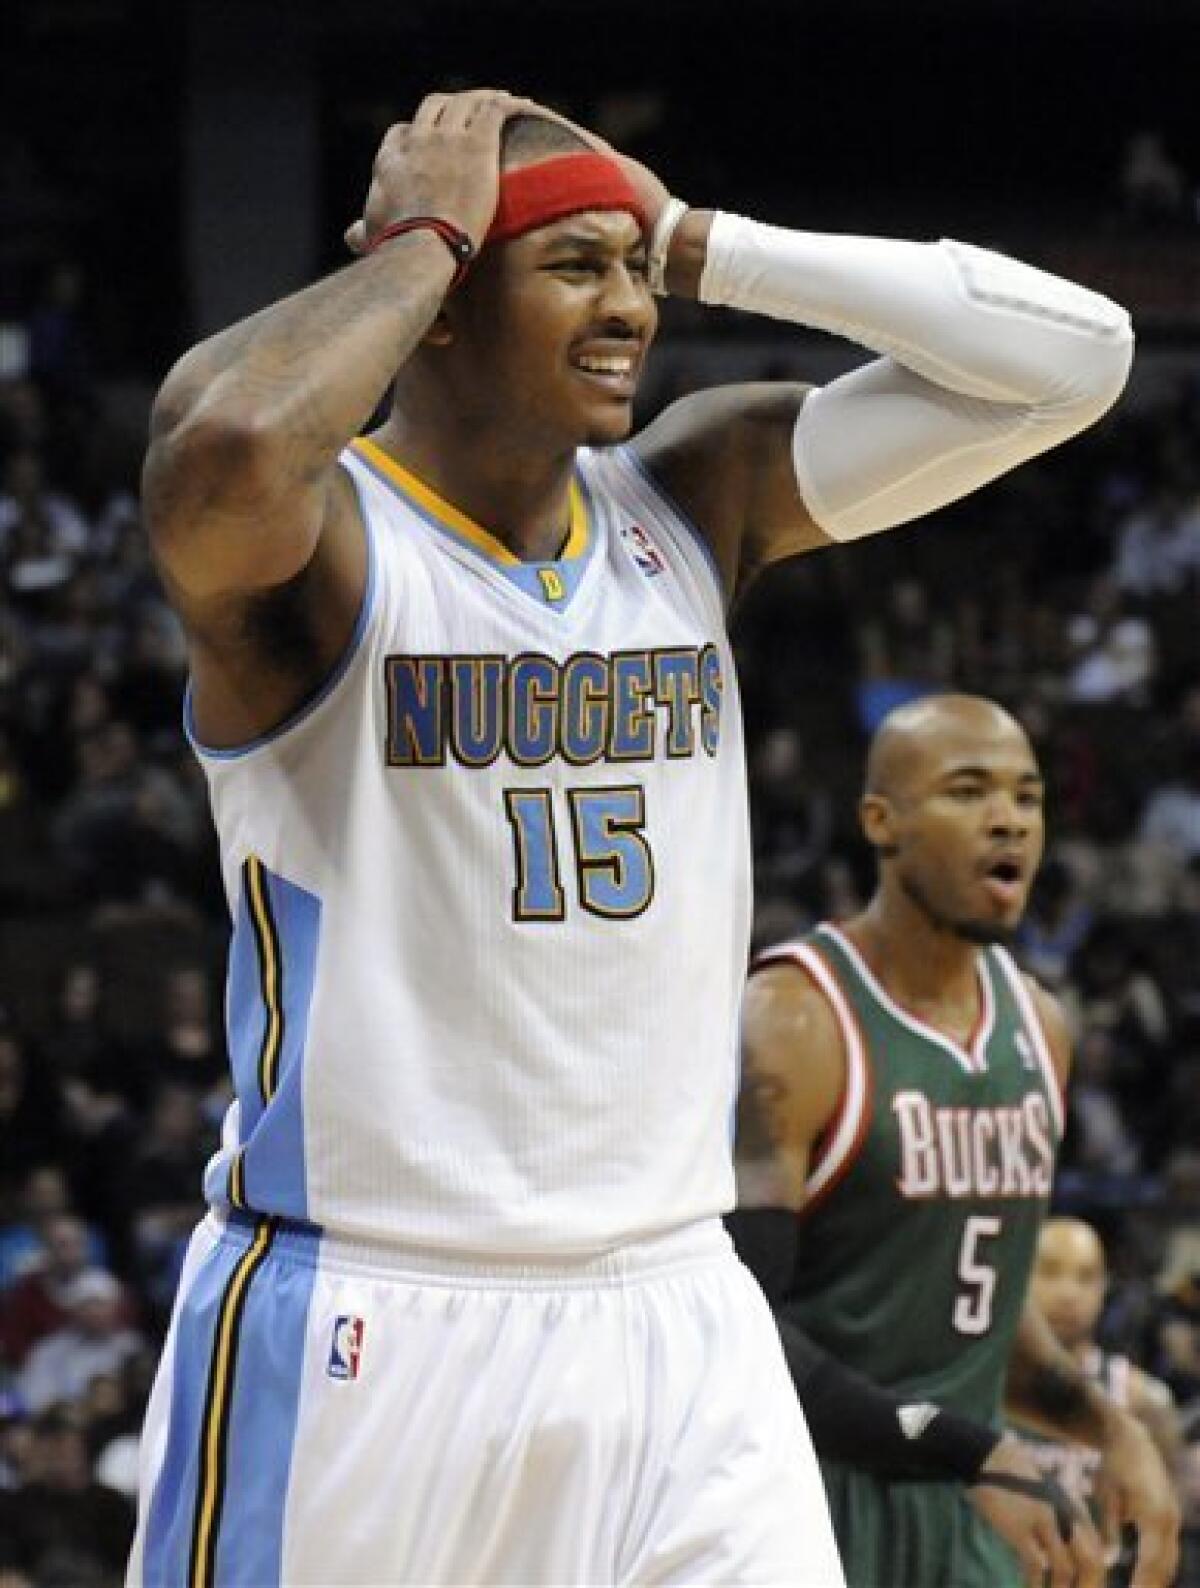 Nuggets should've won NBA championship in 2009, Carmelo Anthony says